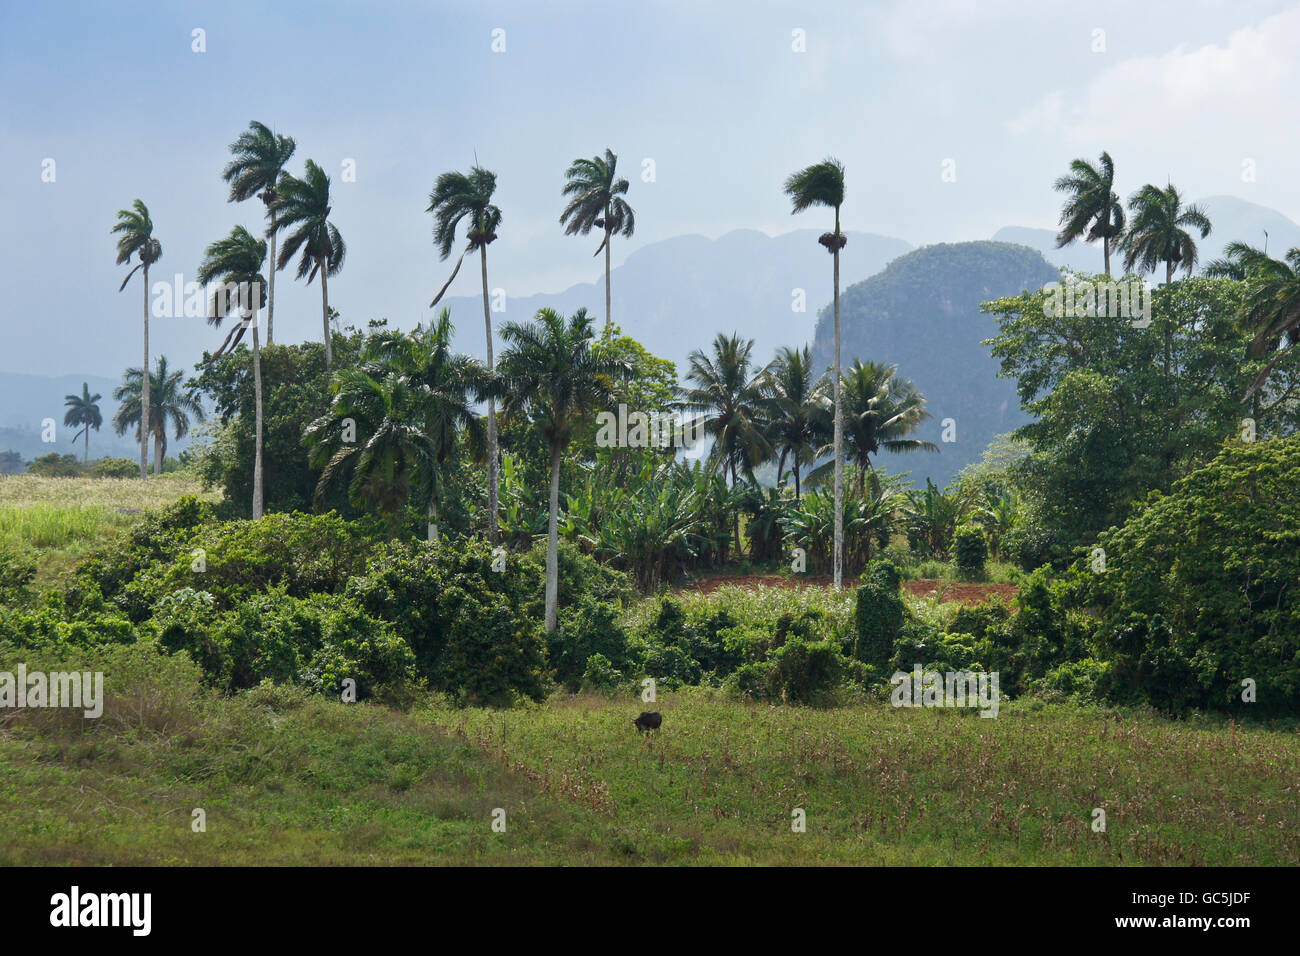 Rural landscape of tropical vegetation and mogotes (karst formations), Pinar del Rio province, Cuba Stock Photo